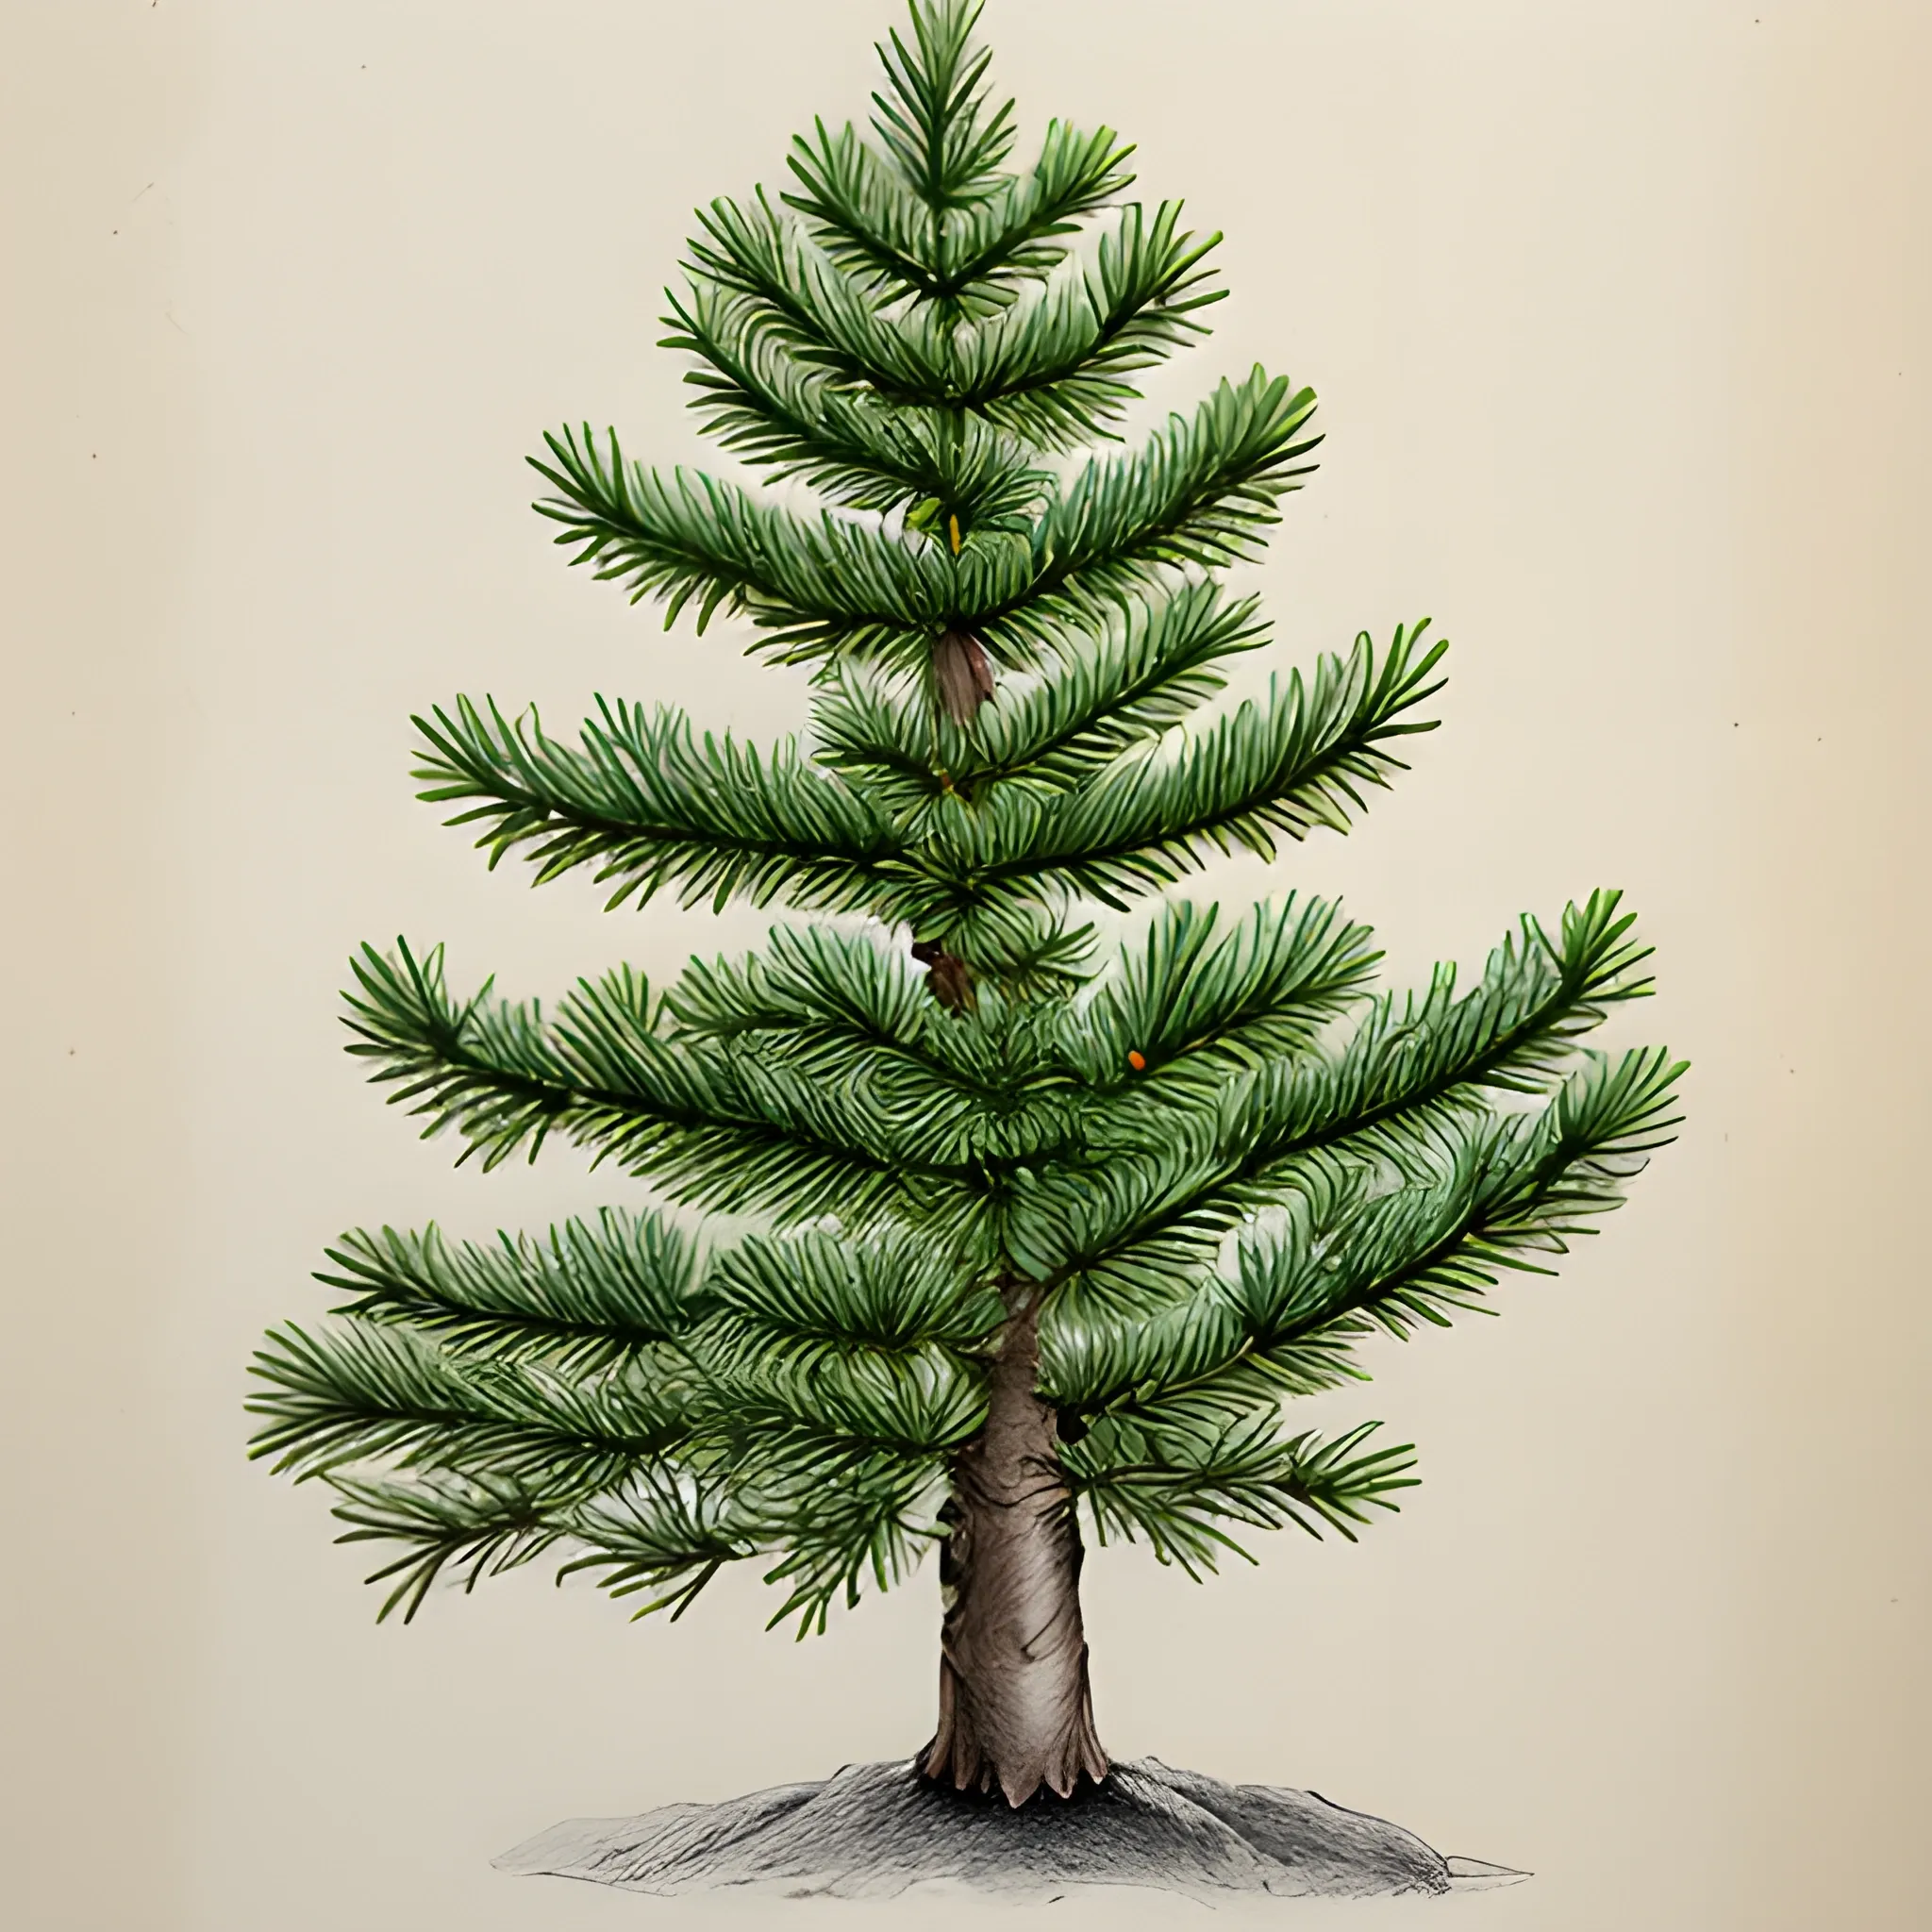 scientific drawing of Picea abies (European spruce), unusually detailed, ink on white paper, single, isolated specimen
